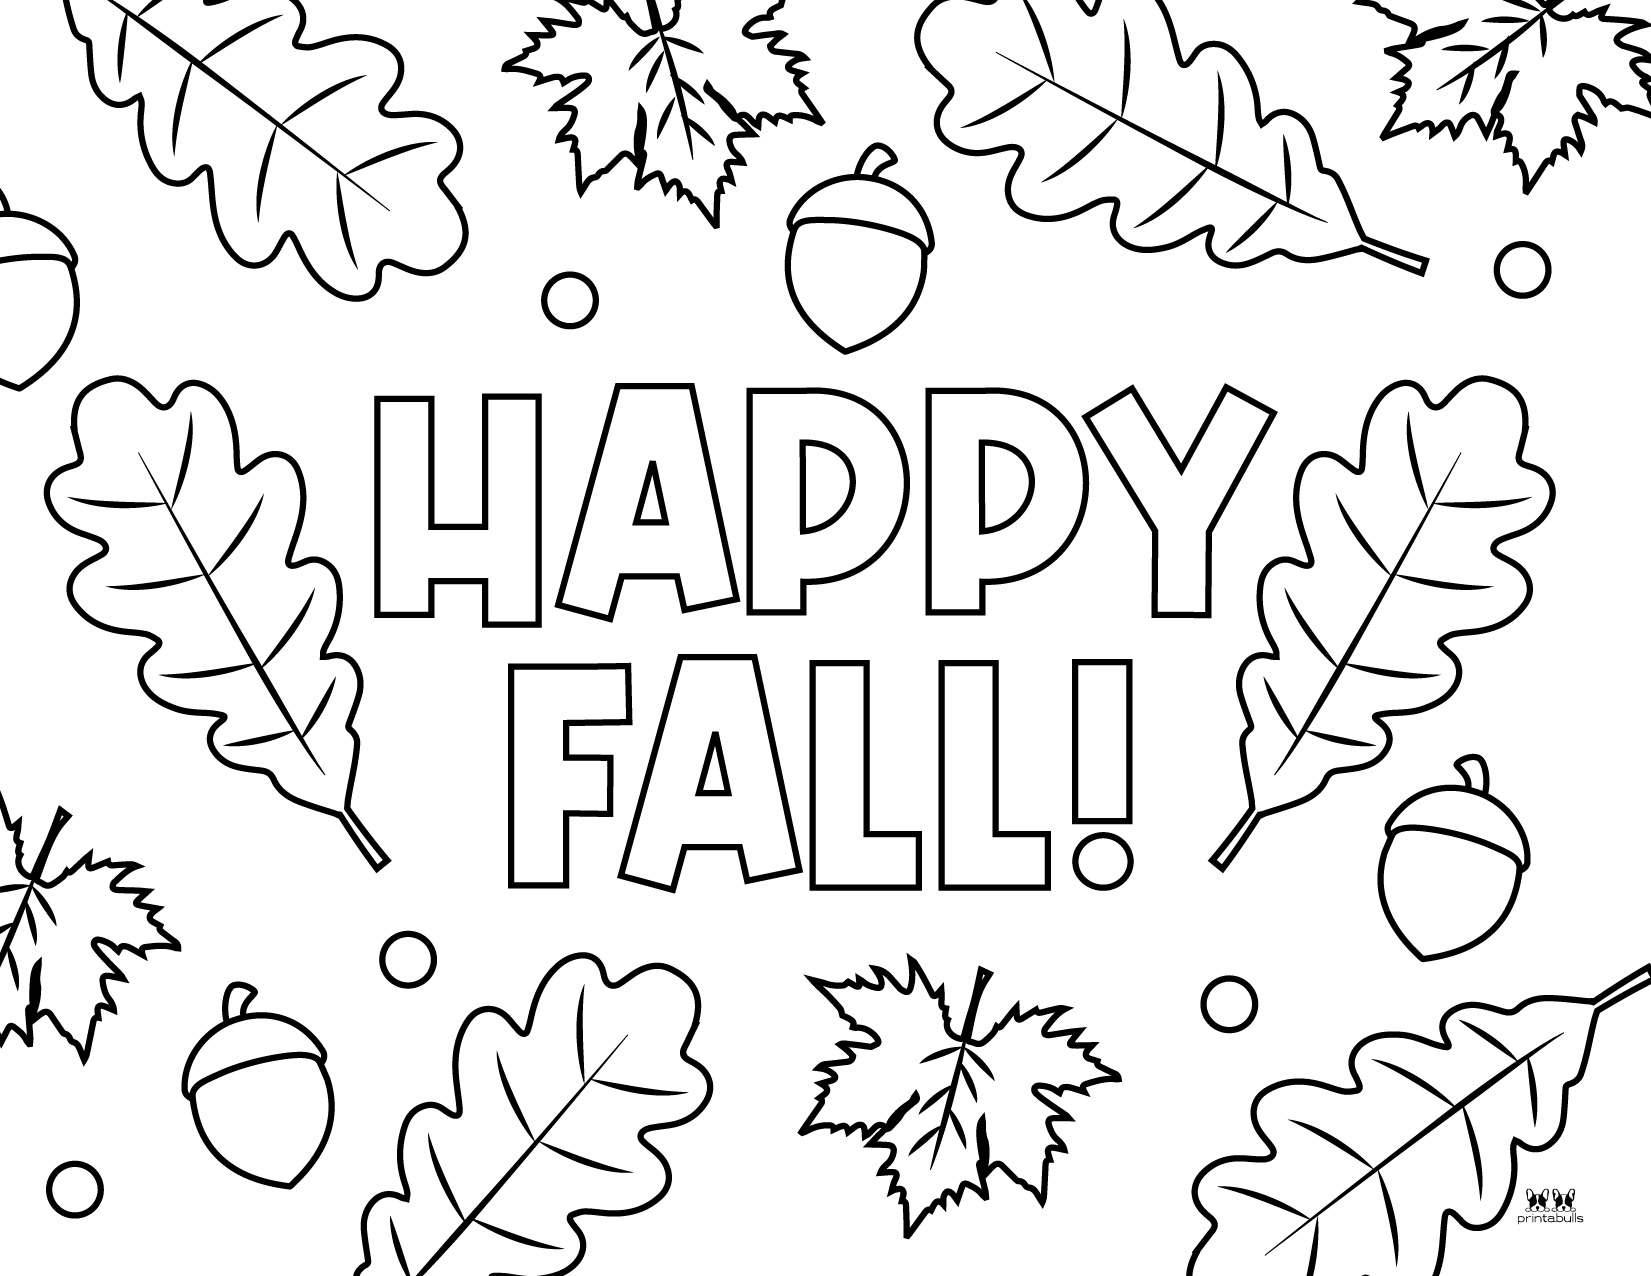 leaf-outlines-templates-coloring-pages-55-free-pages-printabulls